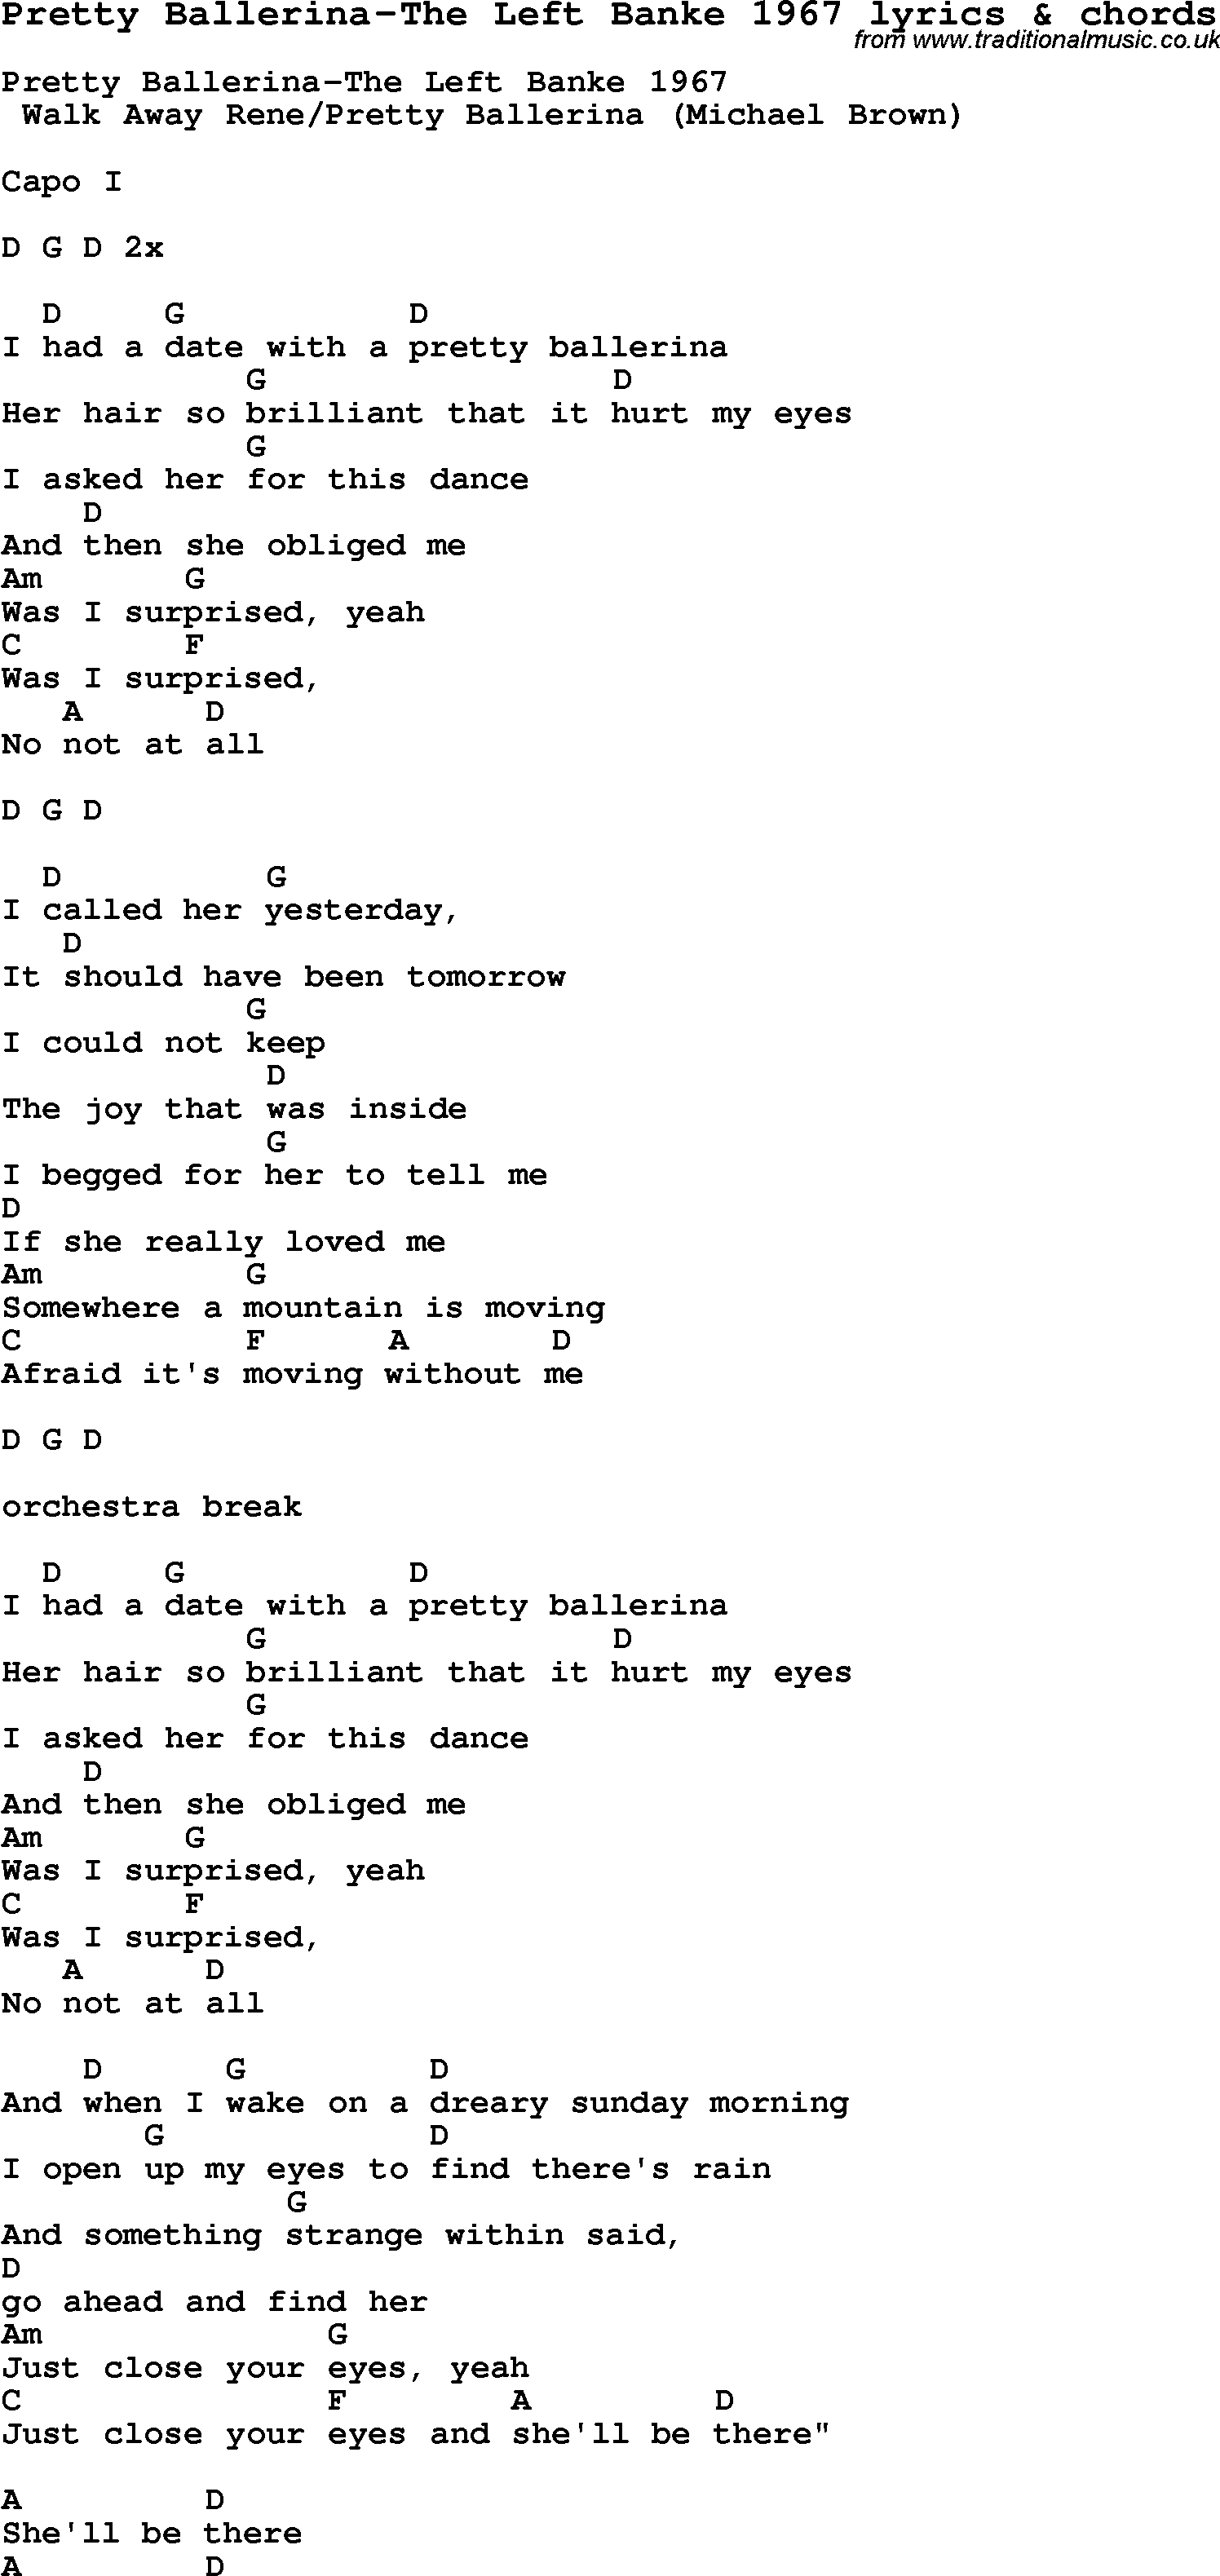 Love Song Lyrics for:Pretty Ballerina-The Left 1967 with chords.